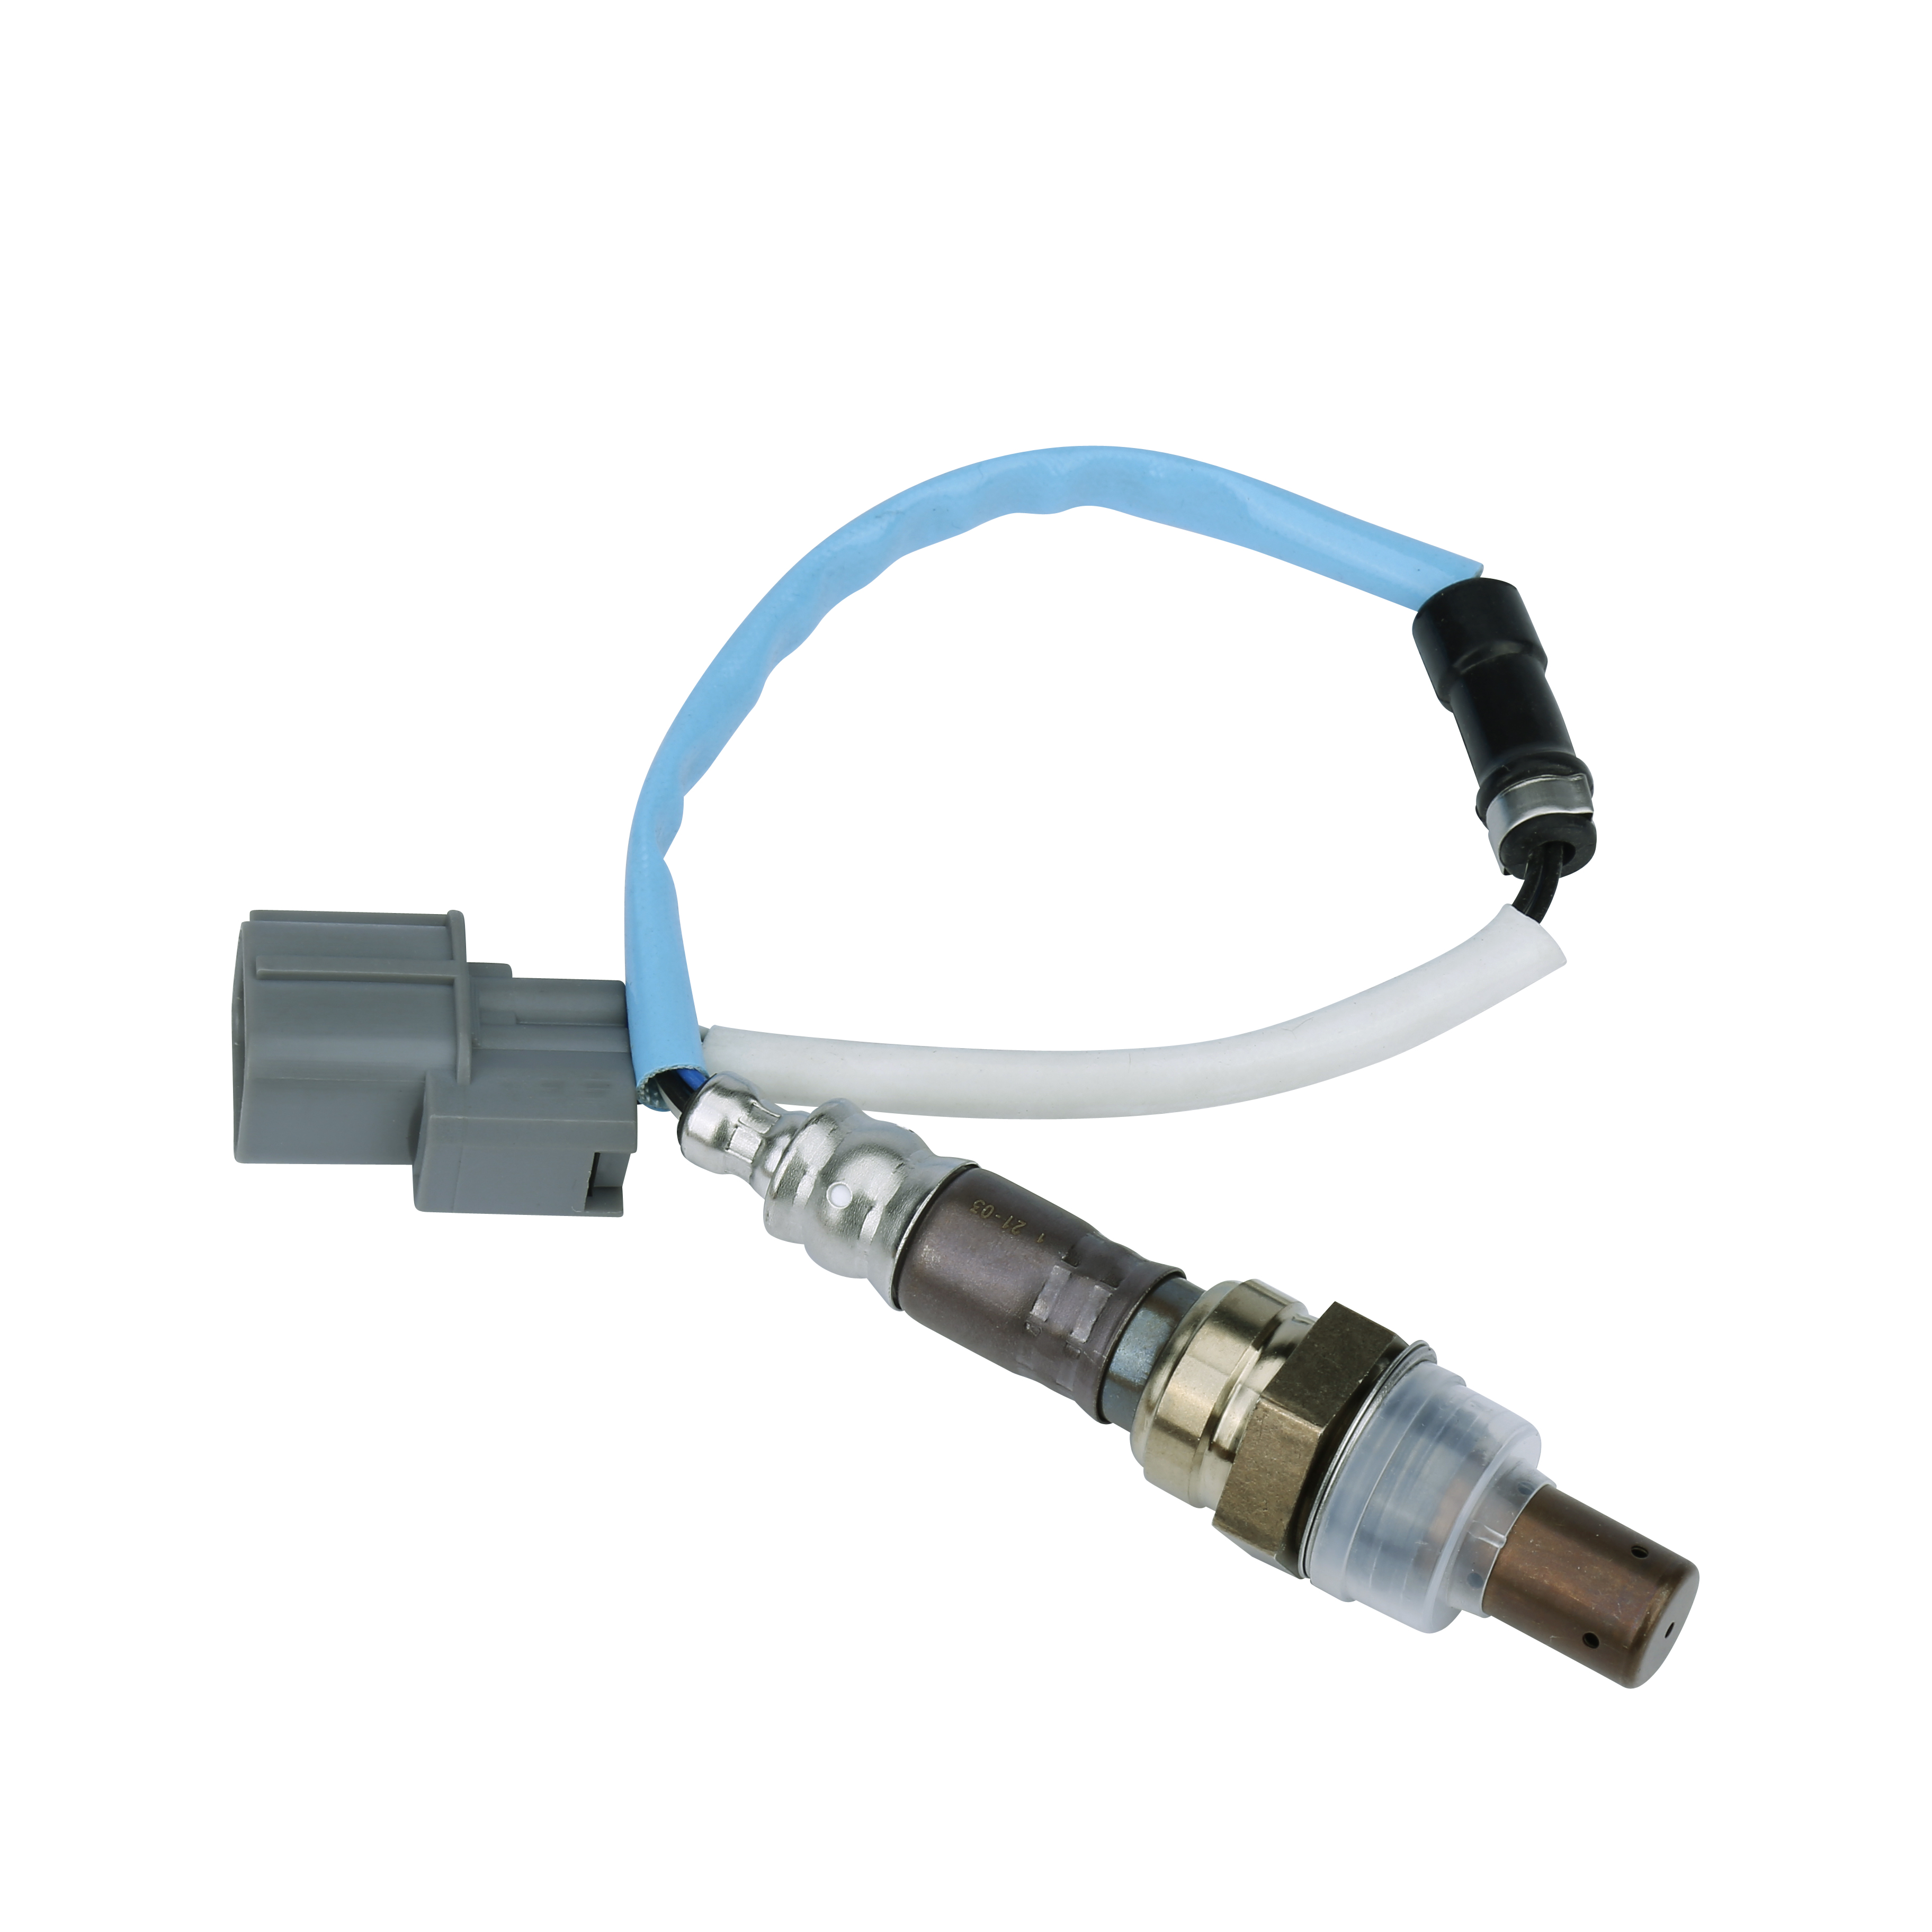 Oxygen Sensor - Replaces 234-9005 - Fits Acura and Honda Vehicles Image